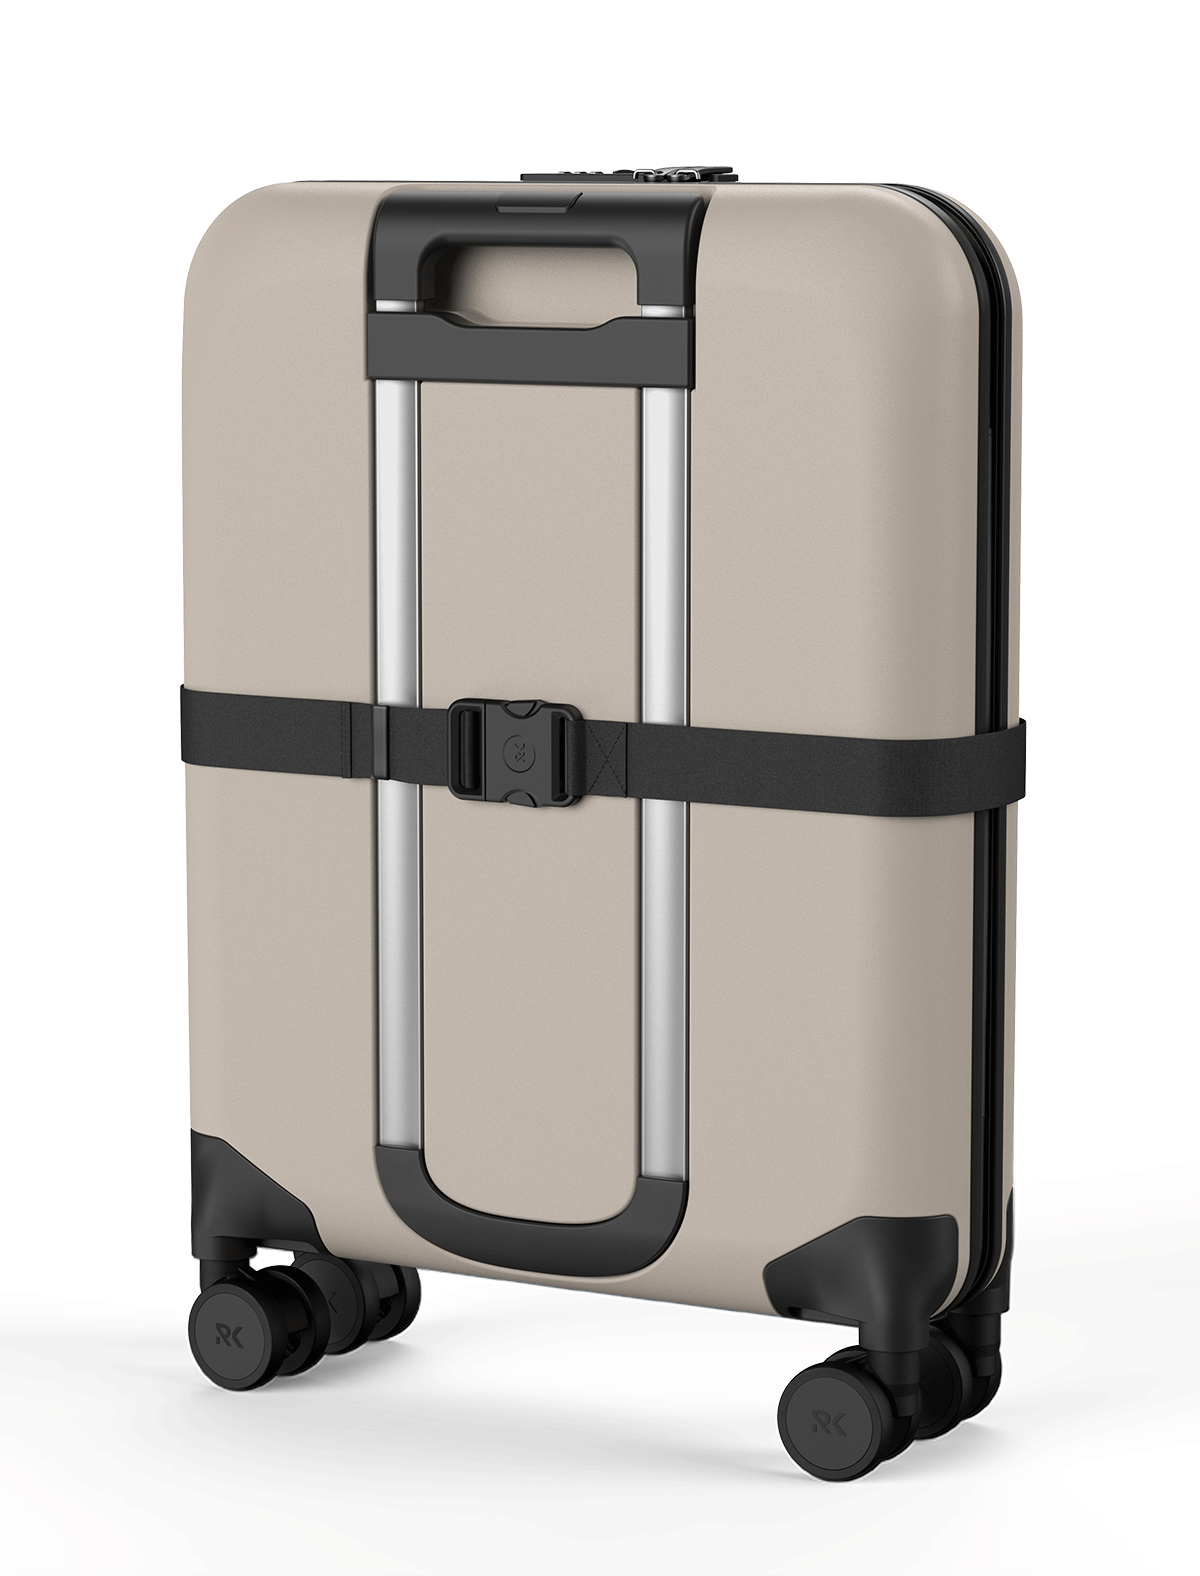 Rollink Flex 360° Collapsible 4-Wheel International Carry-On Luggage